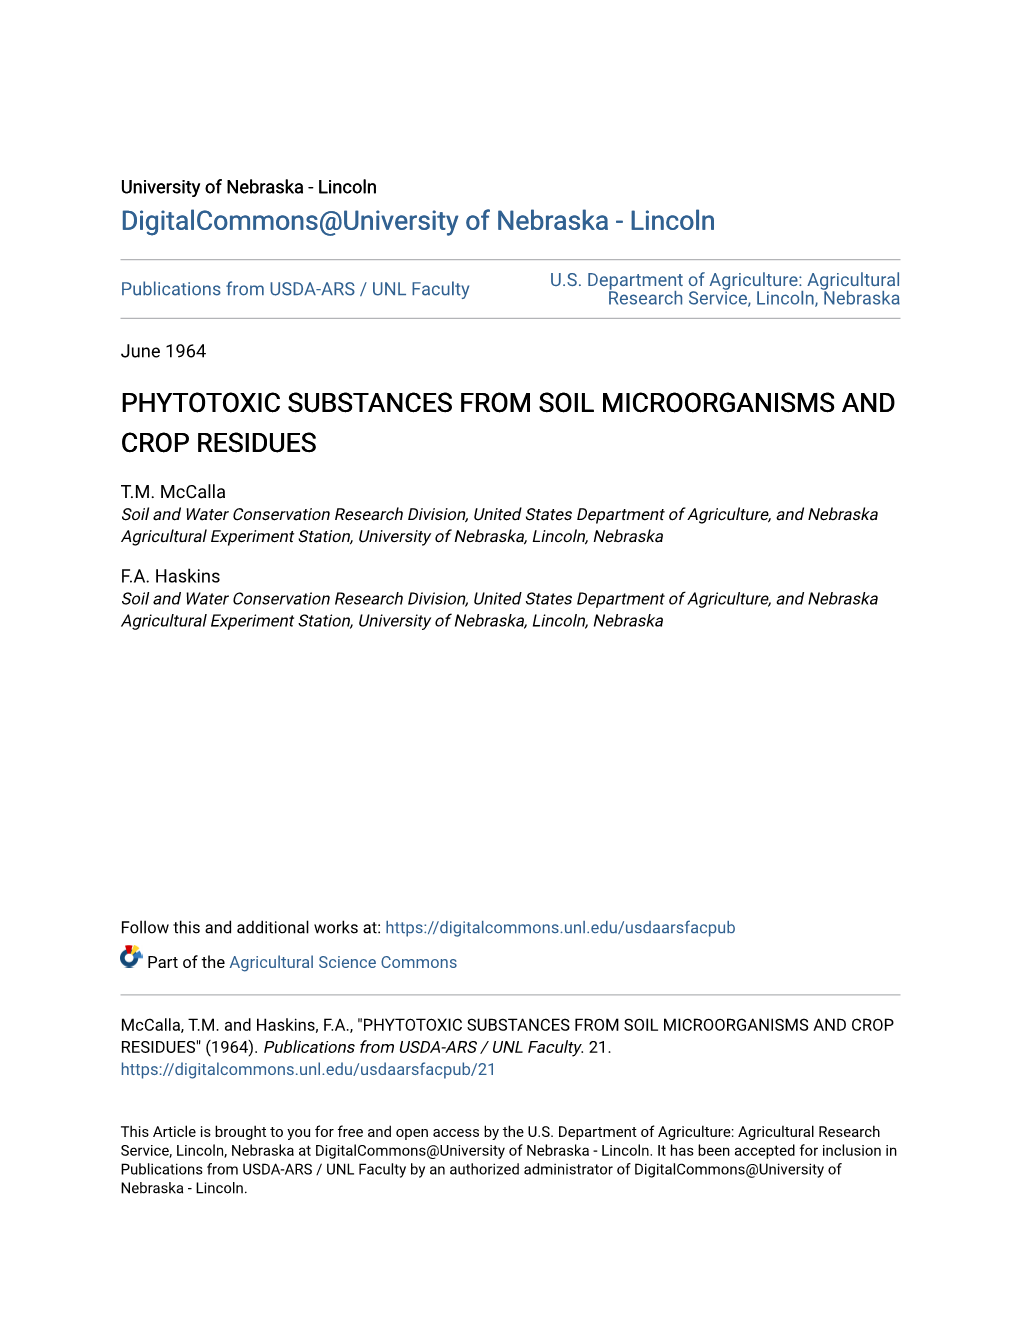 Phytotoxic Substances from Soil Microorganisms and Crop Residues